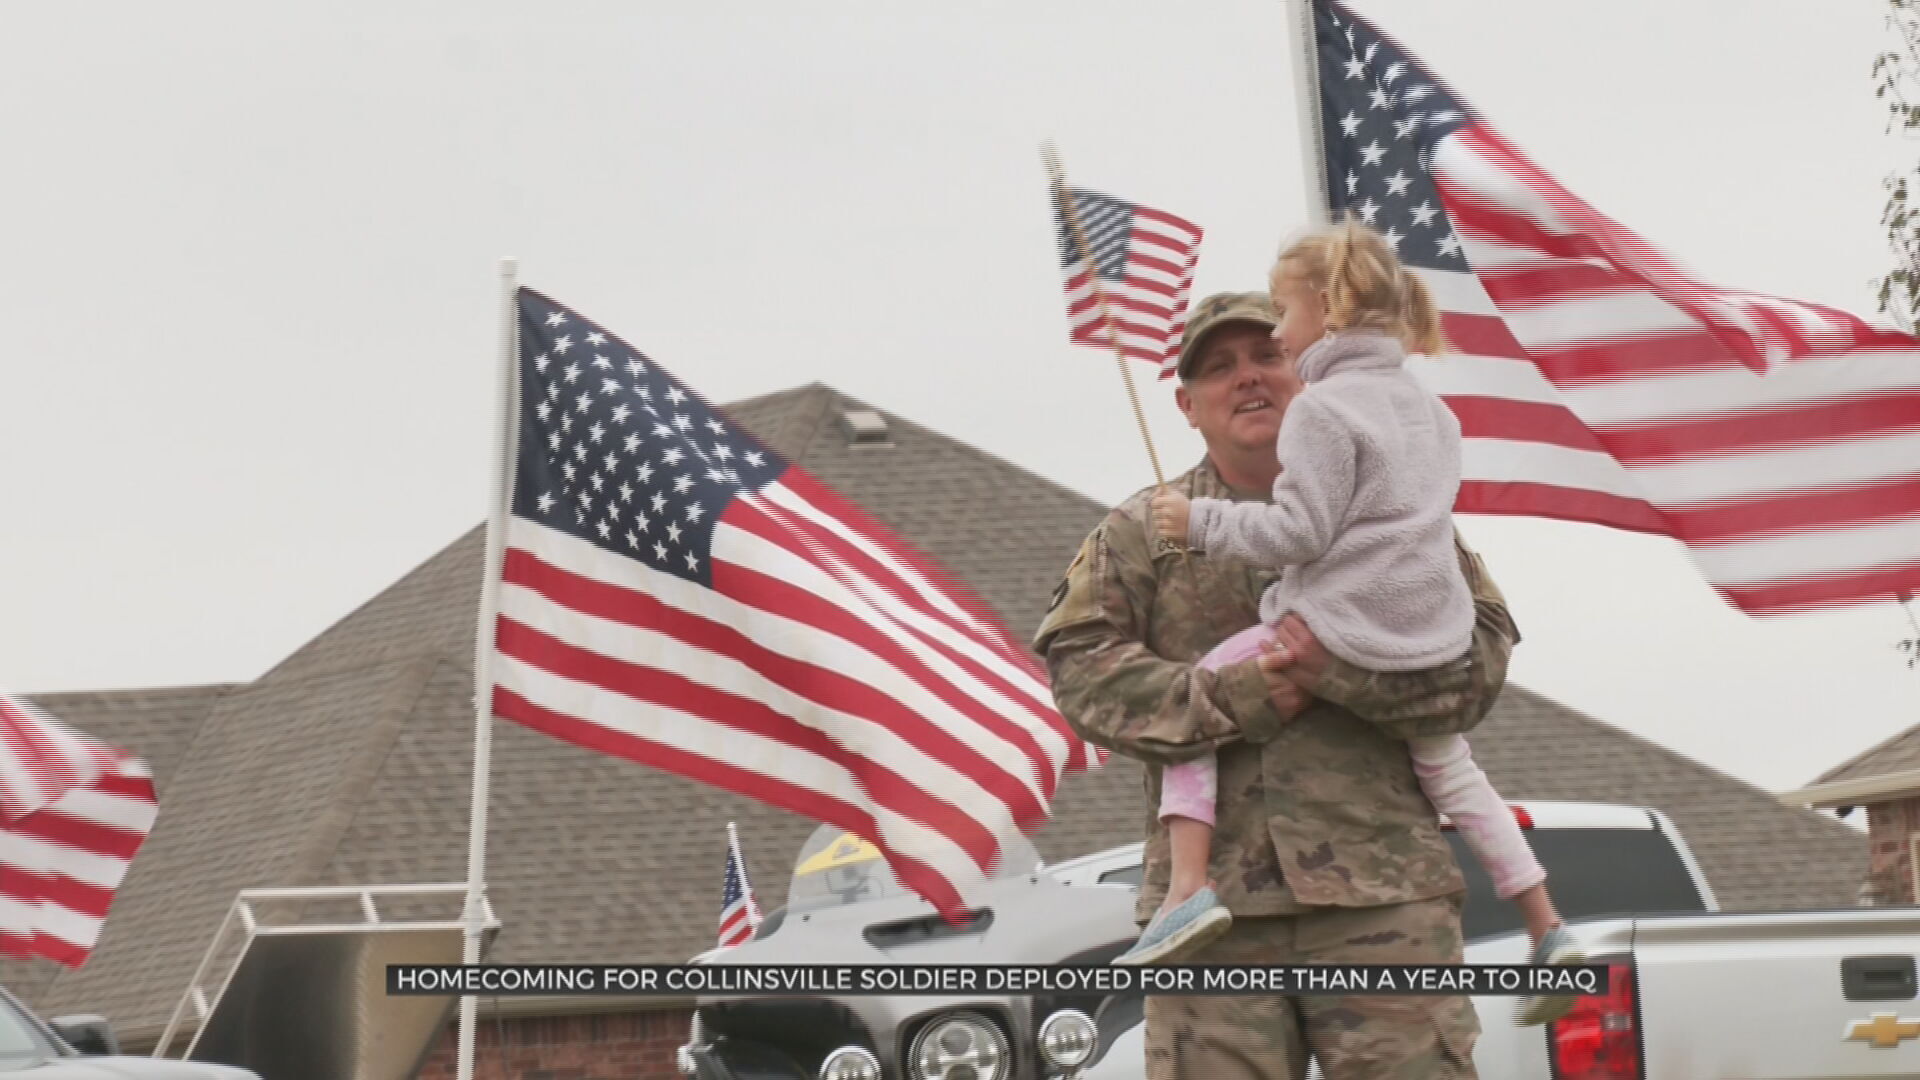 Collinsville Celebrates Homecoming Of Soldier Deployed In Iraq 